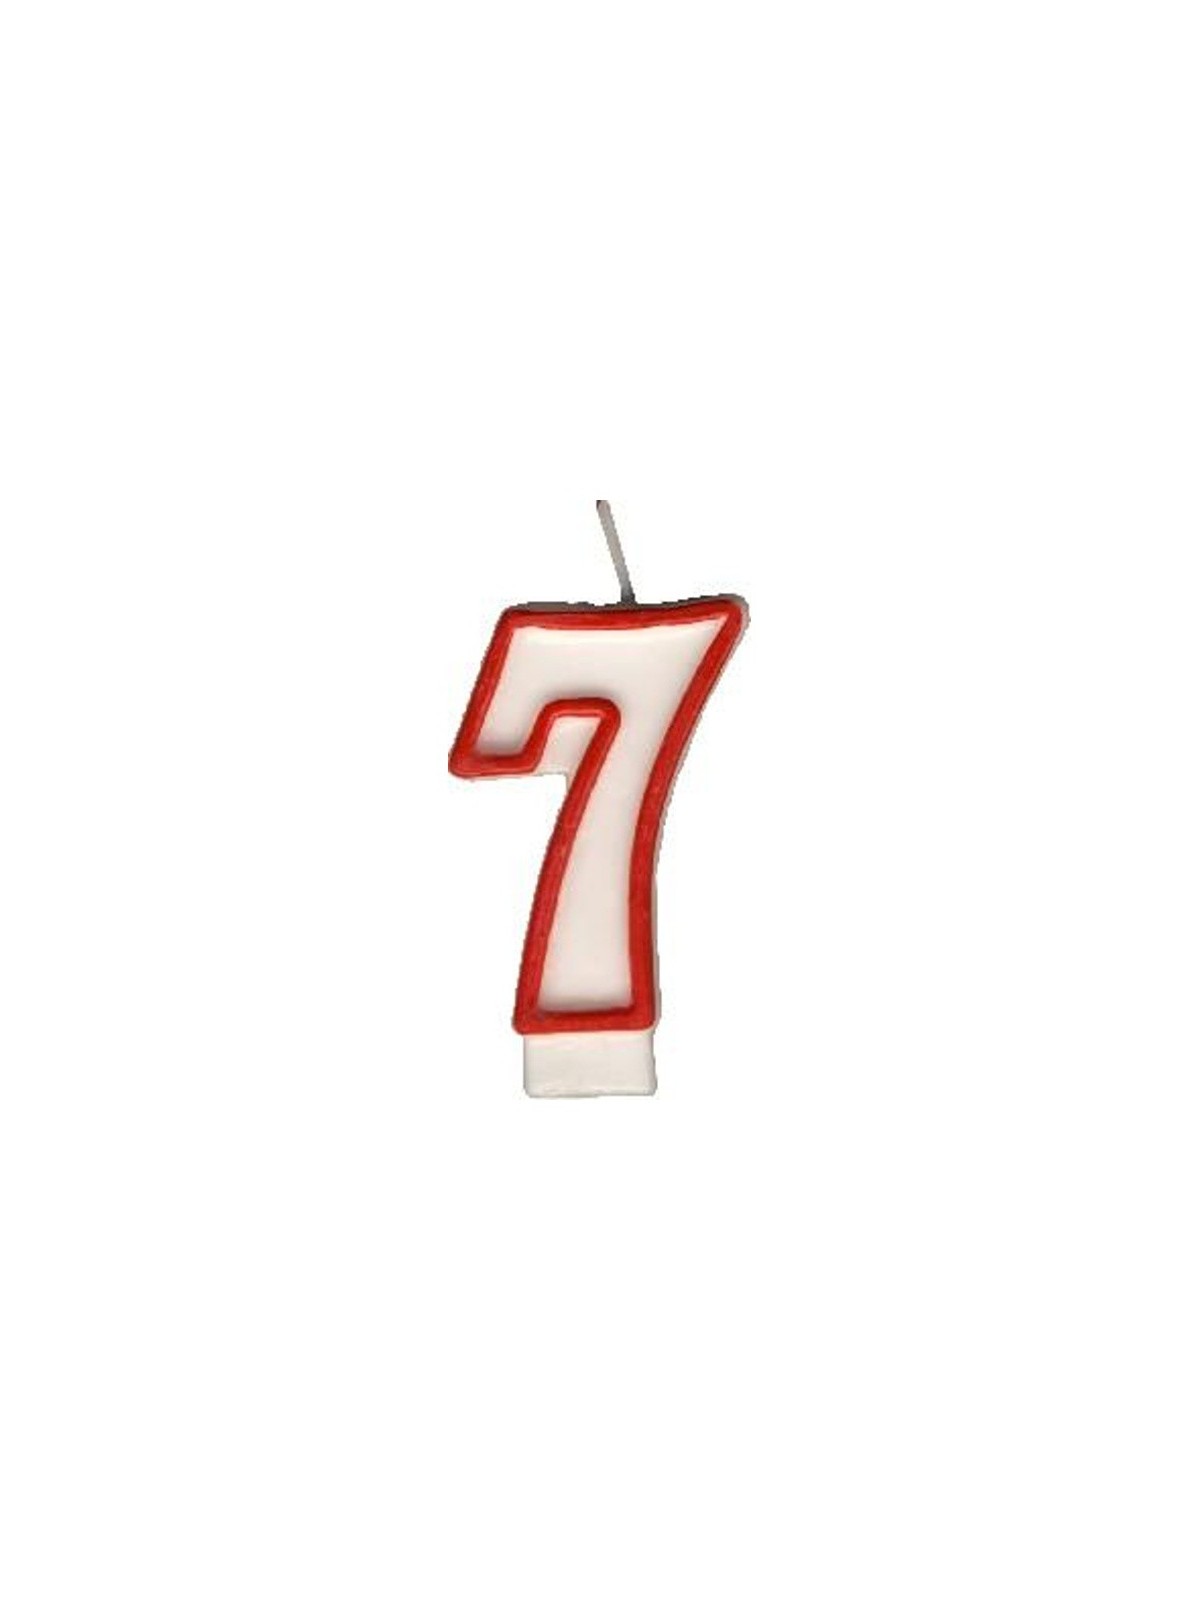 Party Numeral candle - 7